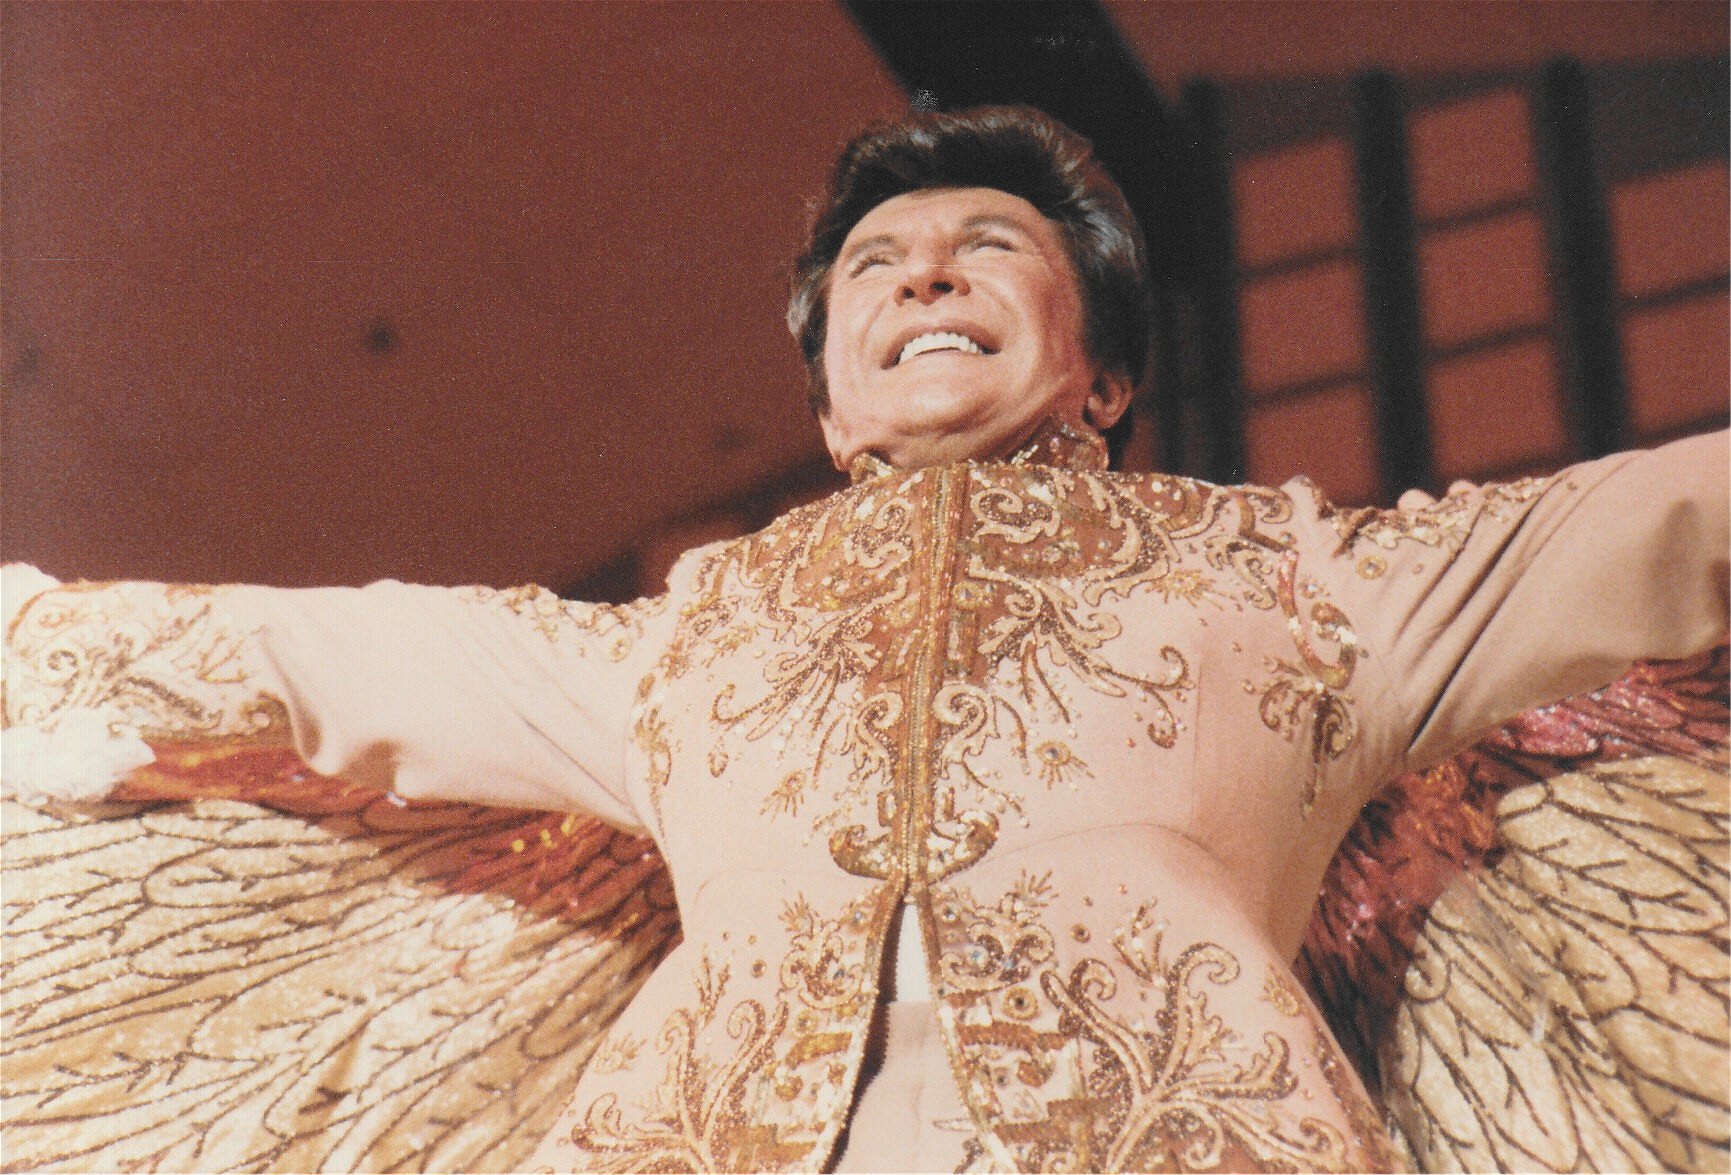 Liberace: rumoured not a fan of careful budgeting. Photo by Alan White.